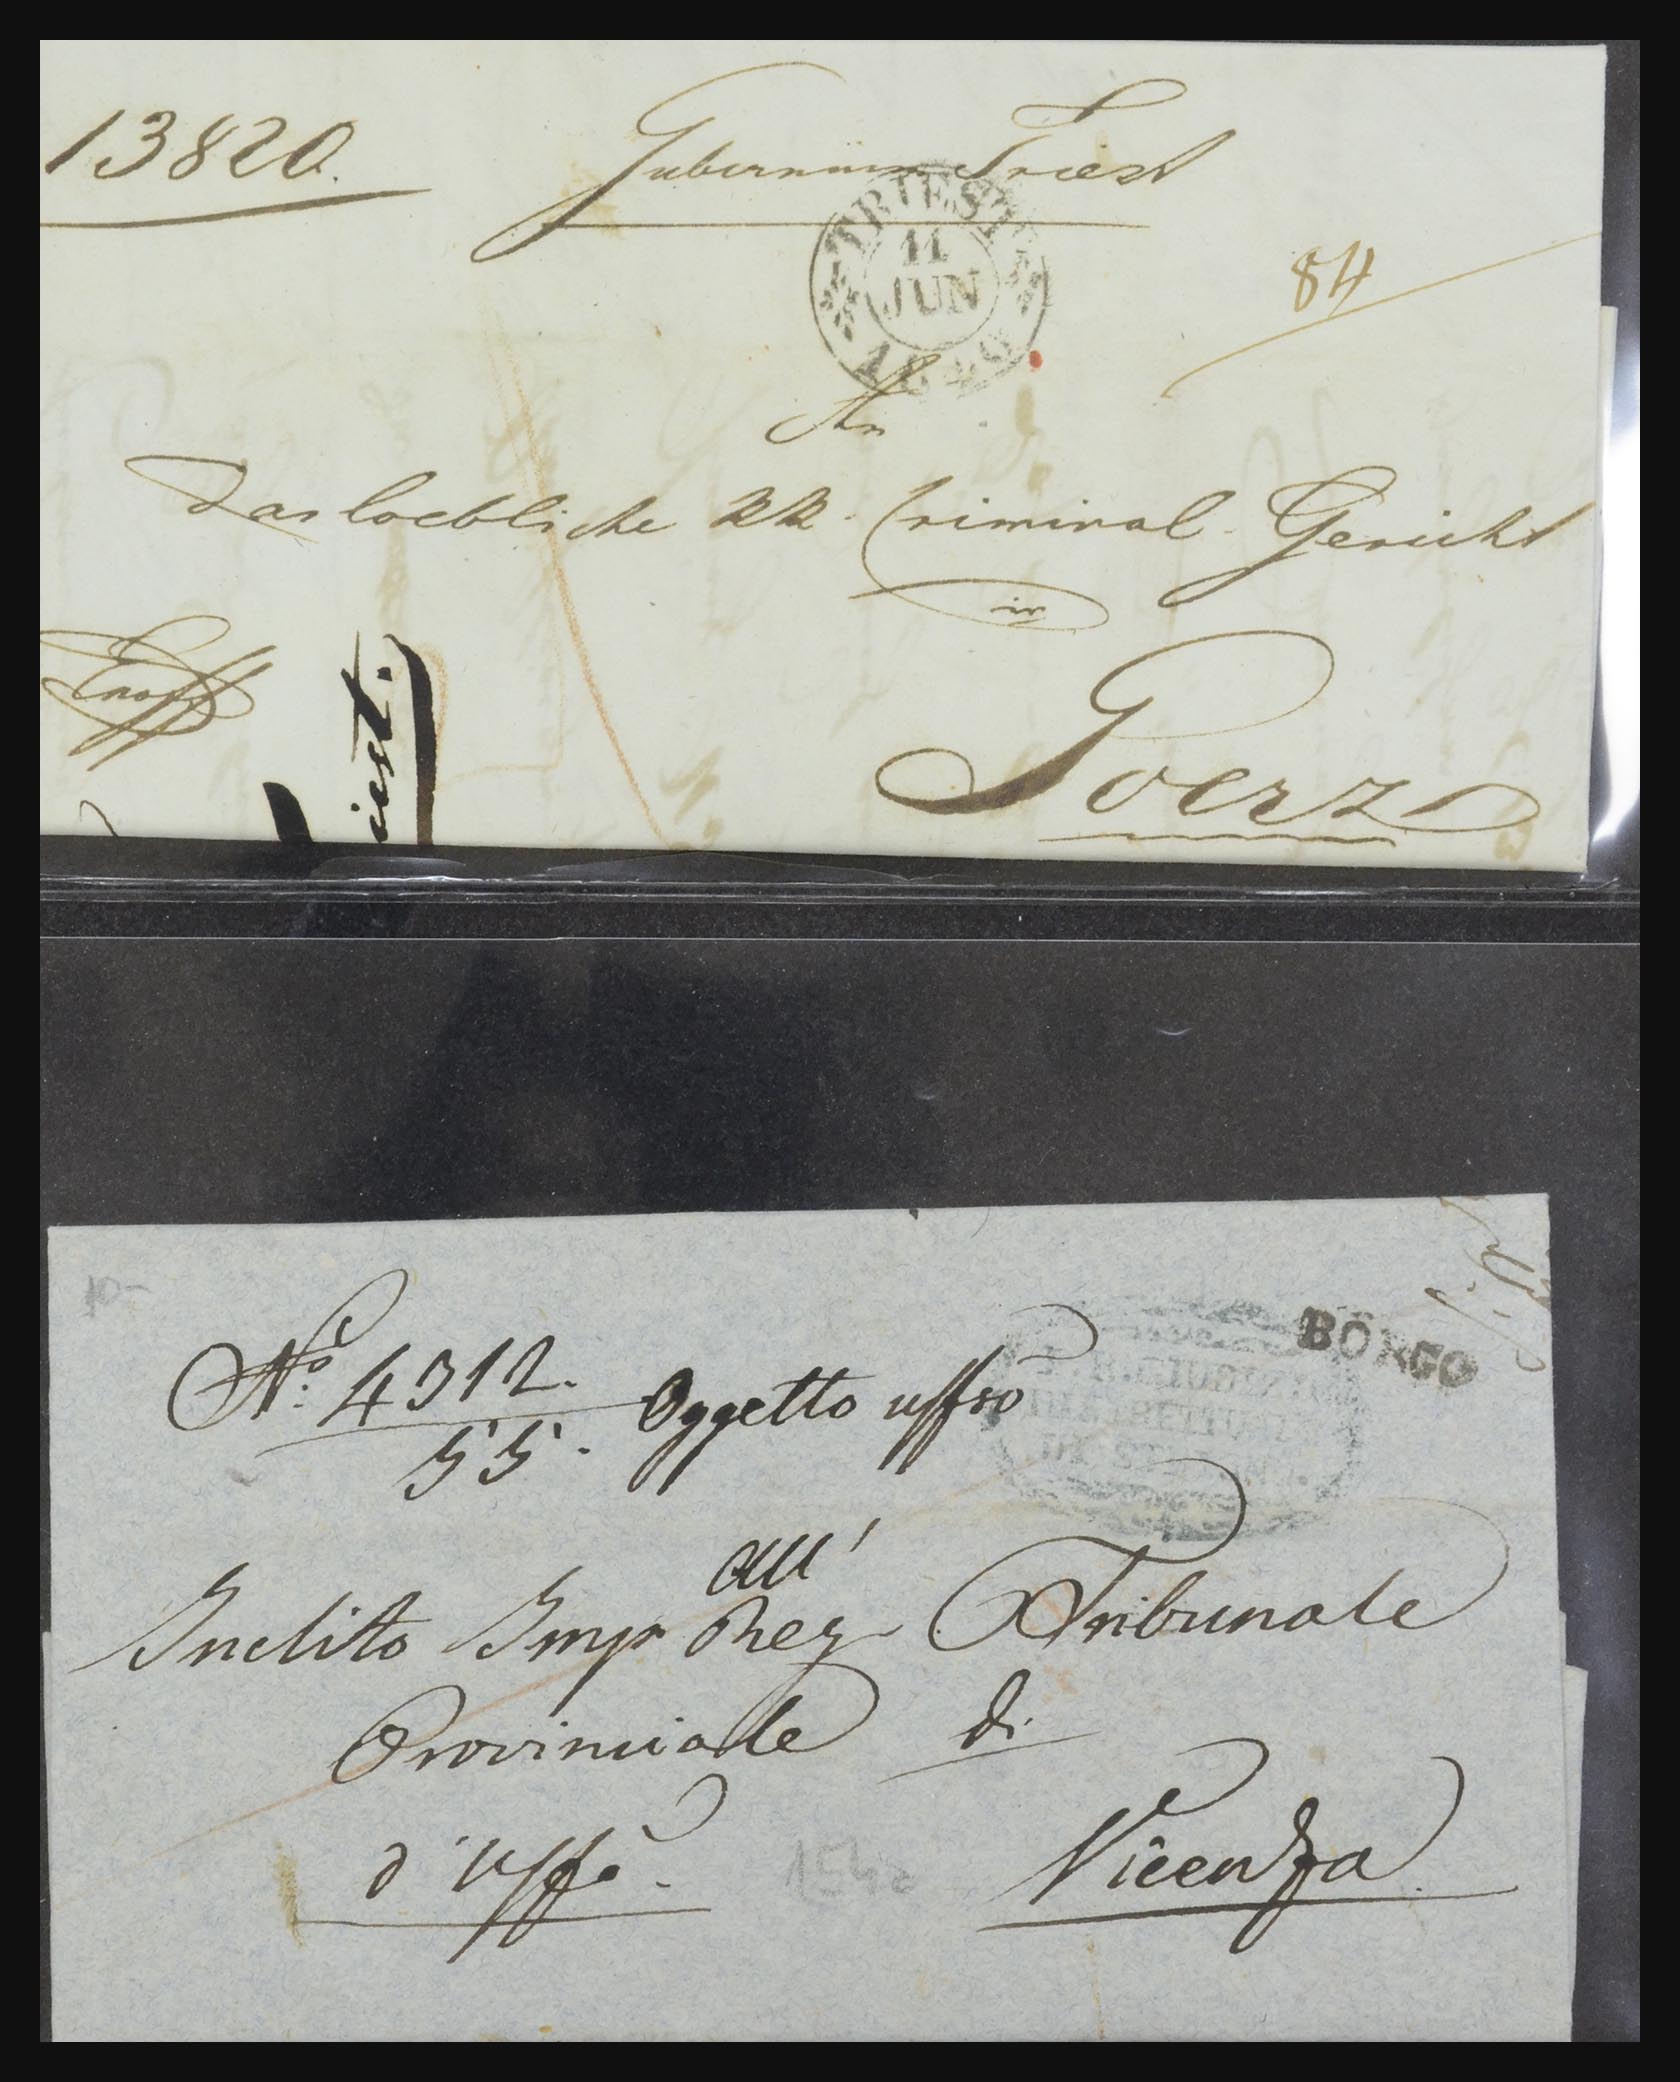 32254 0053 - 32254 Austria covers from 1800.